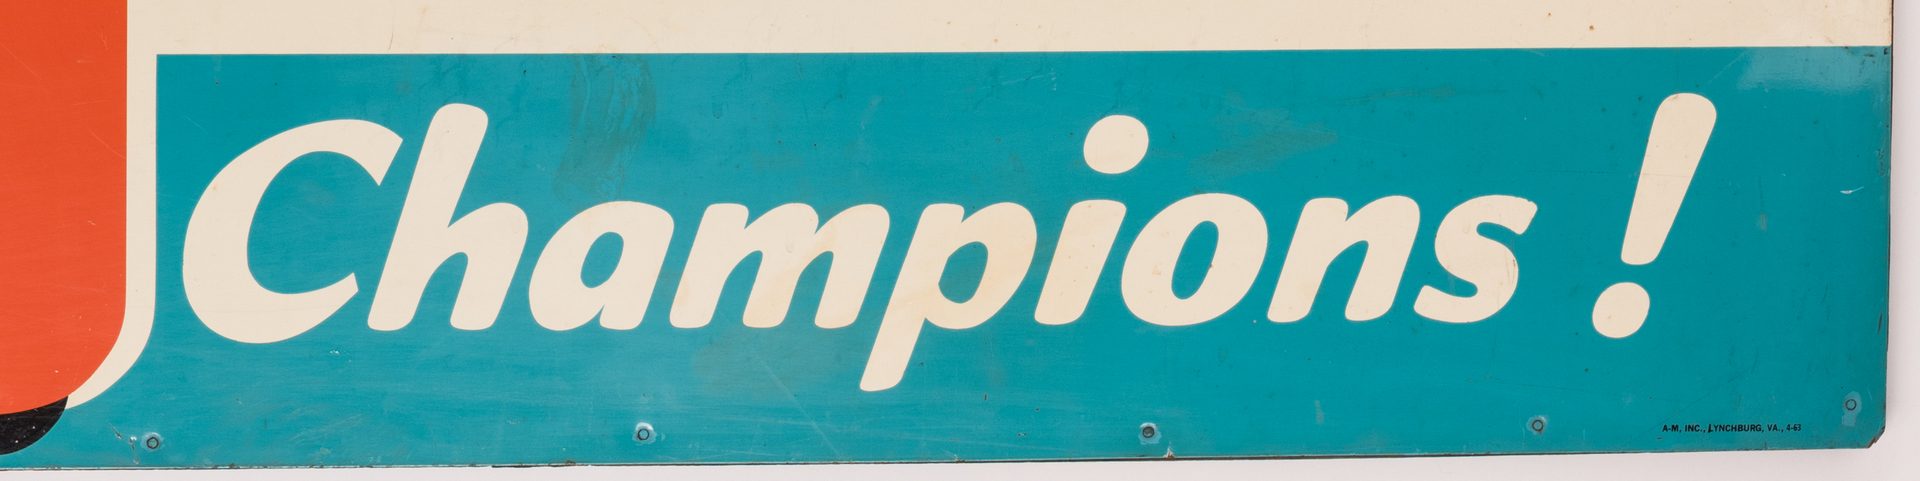 Lot 806: Oilzum SST Advertising Sign, 36 x 72, Wooden Supports